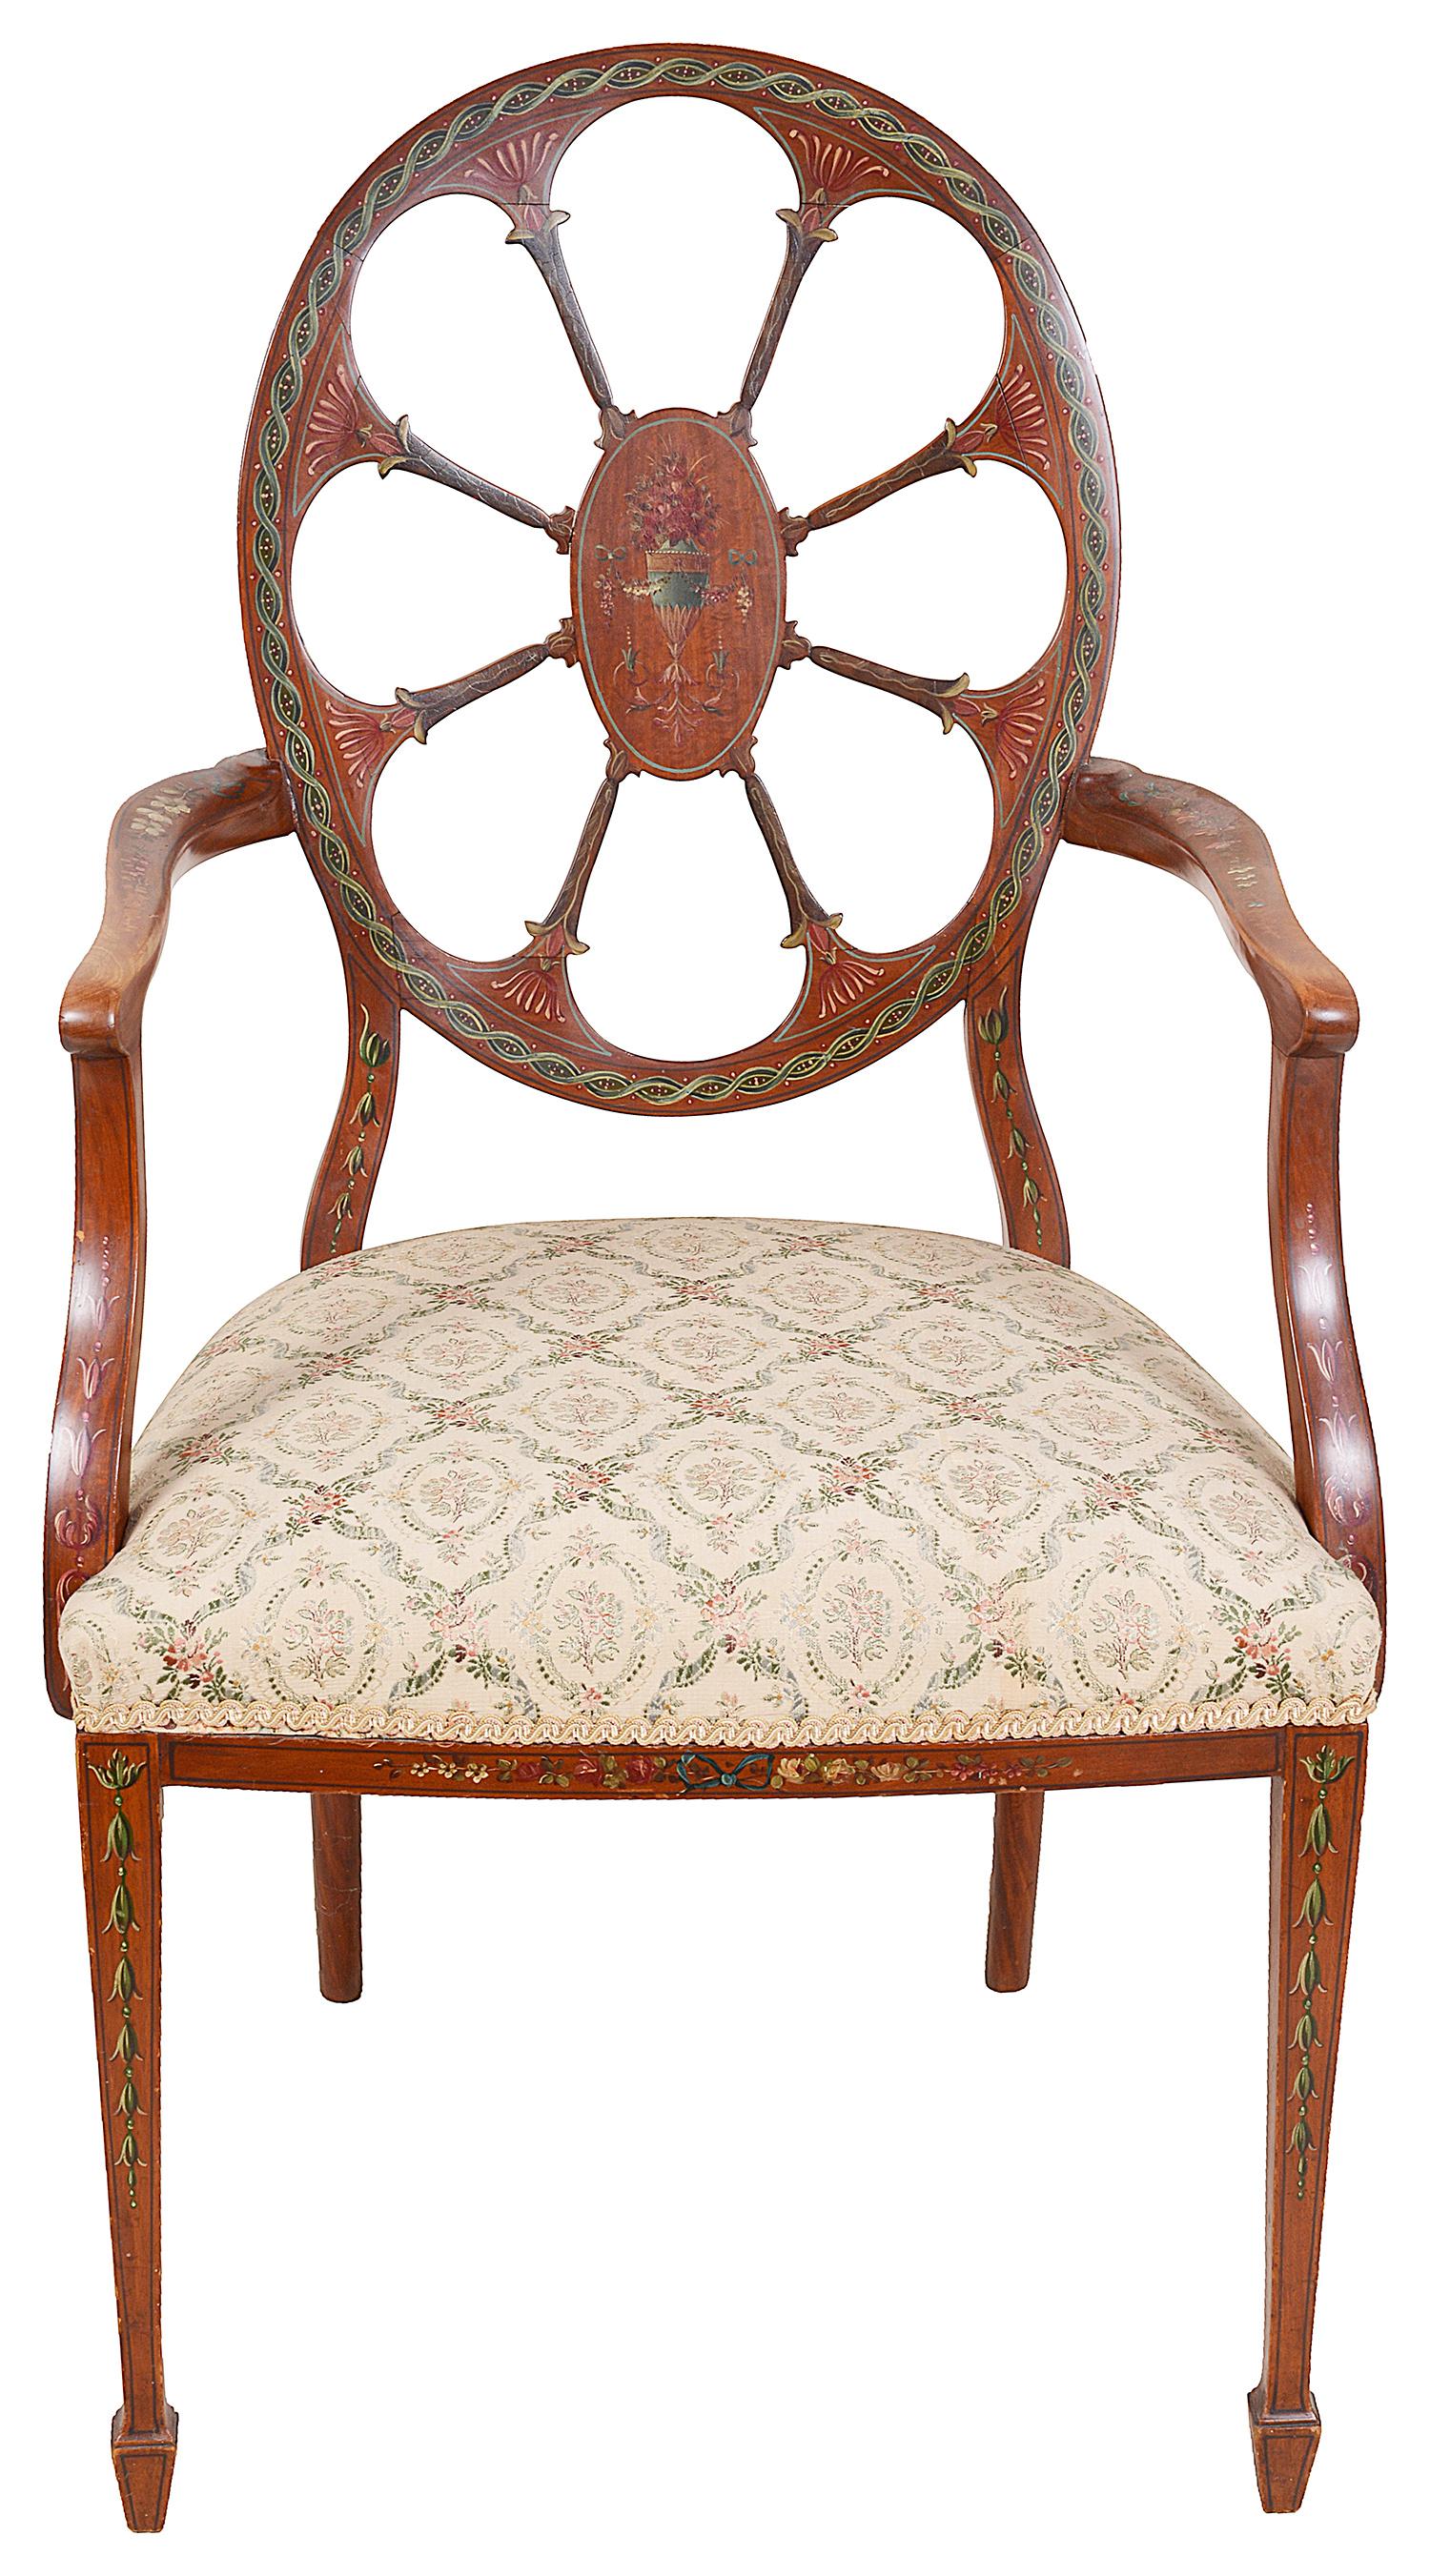 A very good quality late 19th century satinwood, Sheraton revival armchair, having wonderful hand painted classical motif, flower and urn decoration, the back rest with a central oval panel by carved palm like supports. A stuff over upholstered